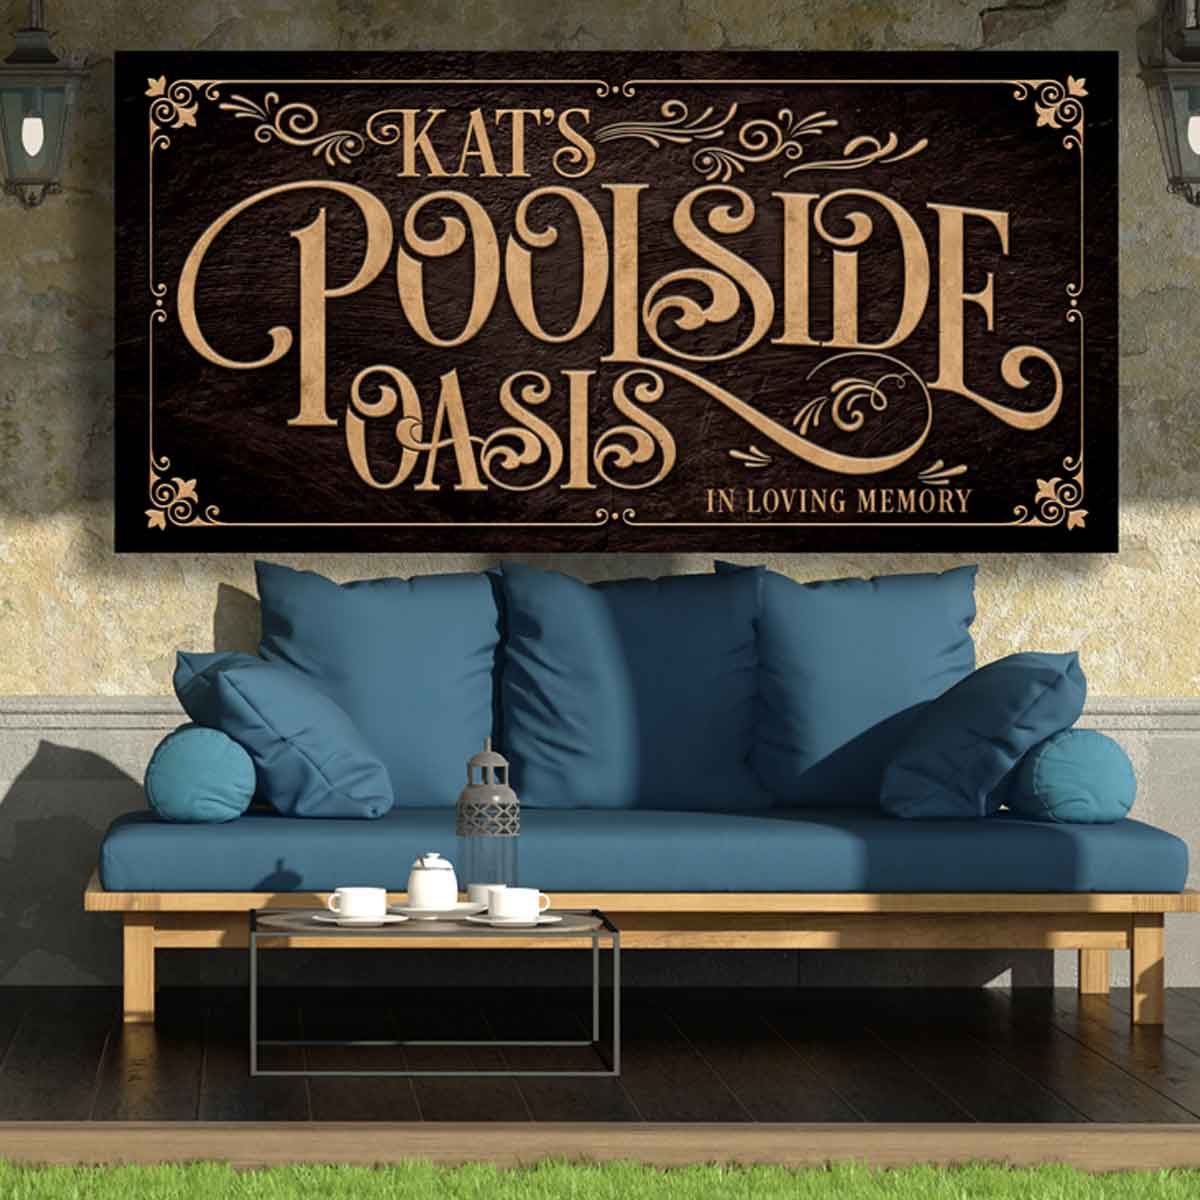 Pool Signs - Poolside Oasis with dark brown stone background texture and the words Poolside Oasis